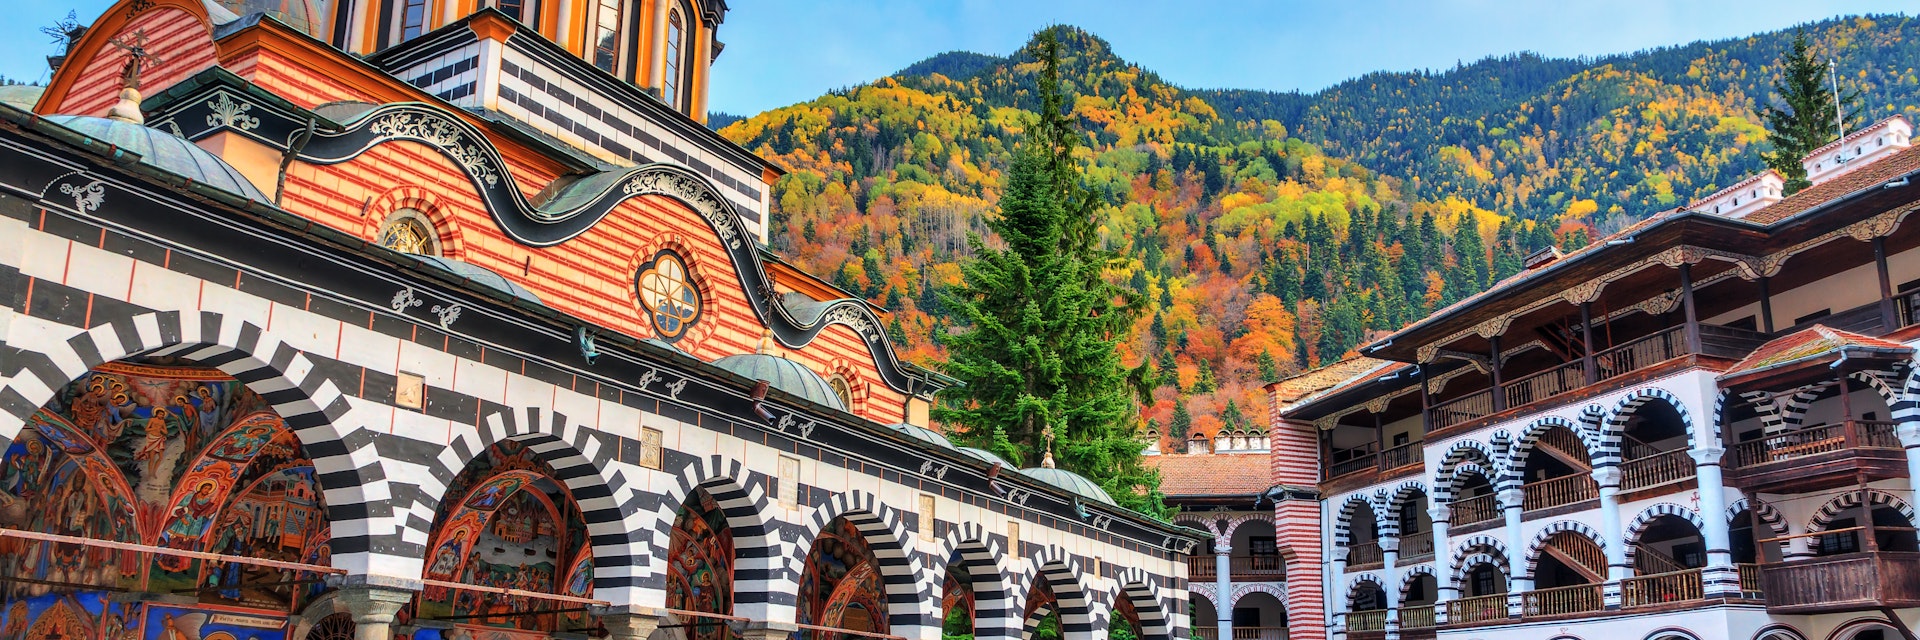 Exterior of the Orthodox Rila Monastery in the Rila Nature Park.
1160109394
ancient, architecture, attraction, autumn, beautiful, blue, building, bulgaria, church, city, clouds, courtyard, culture, destination, europe, exterior, facade, fall, famous, heritage, historic, history, journey, landmark, medieval, monastery, monument, mountains, national, national park, october, old, orthodox, park, religion, religious, rila, rila monastery, rila nature park, sky, structure, tourism, tourist, town, travel, unesco, vacation, vibrant, visit